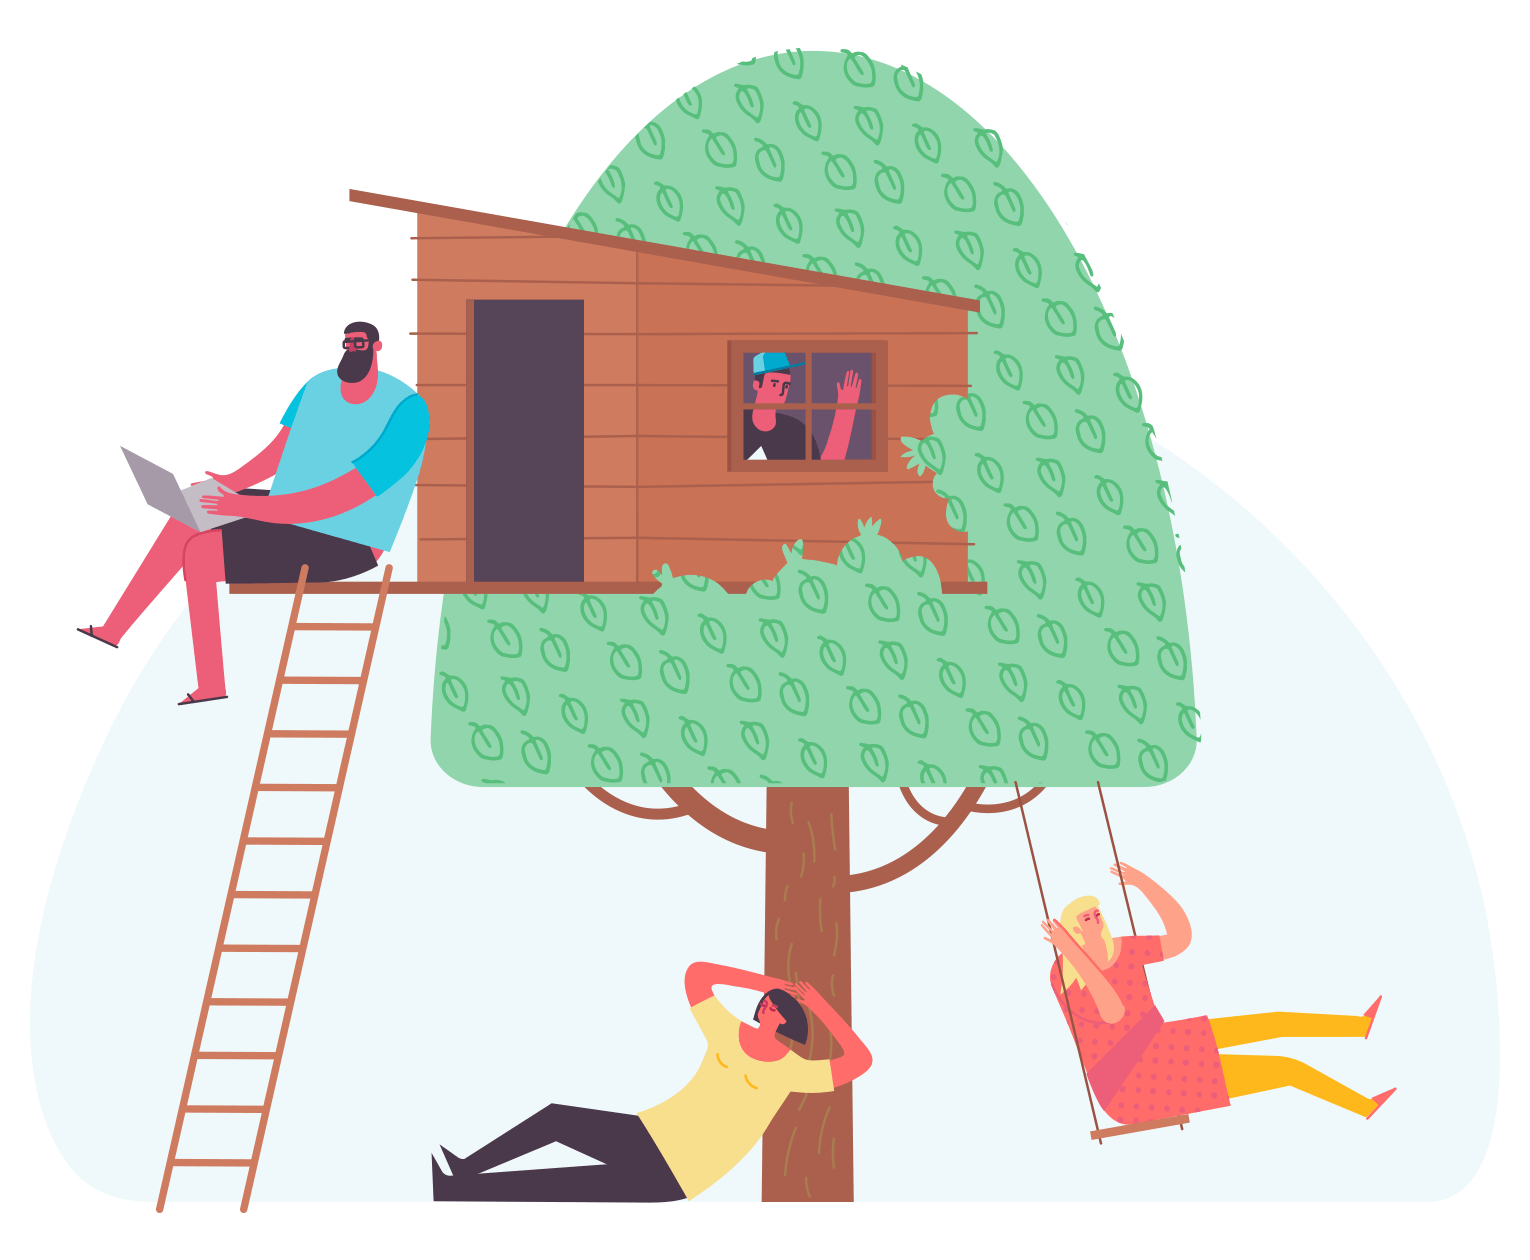 A group of people relaxing in the tree-house they just built